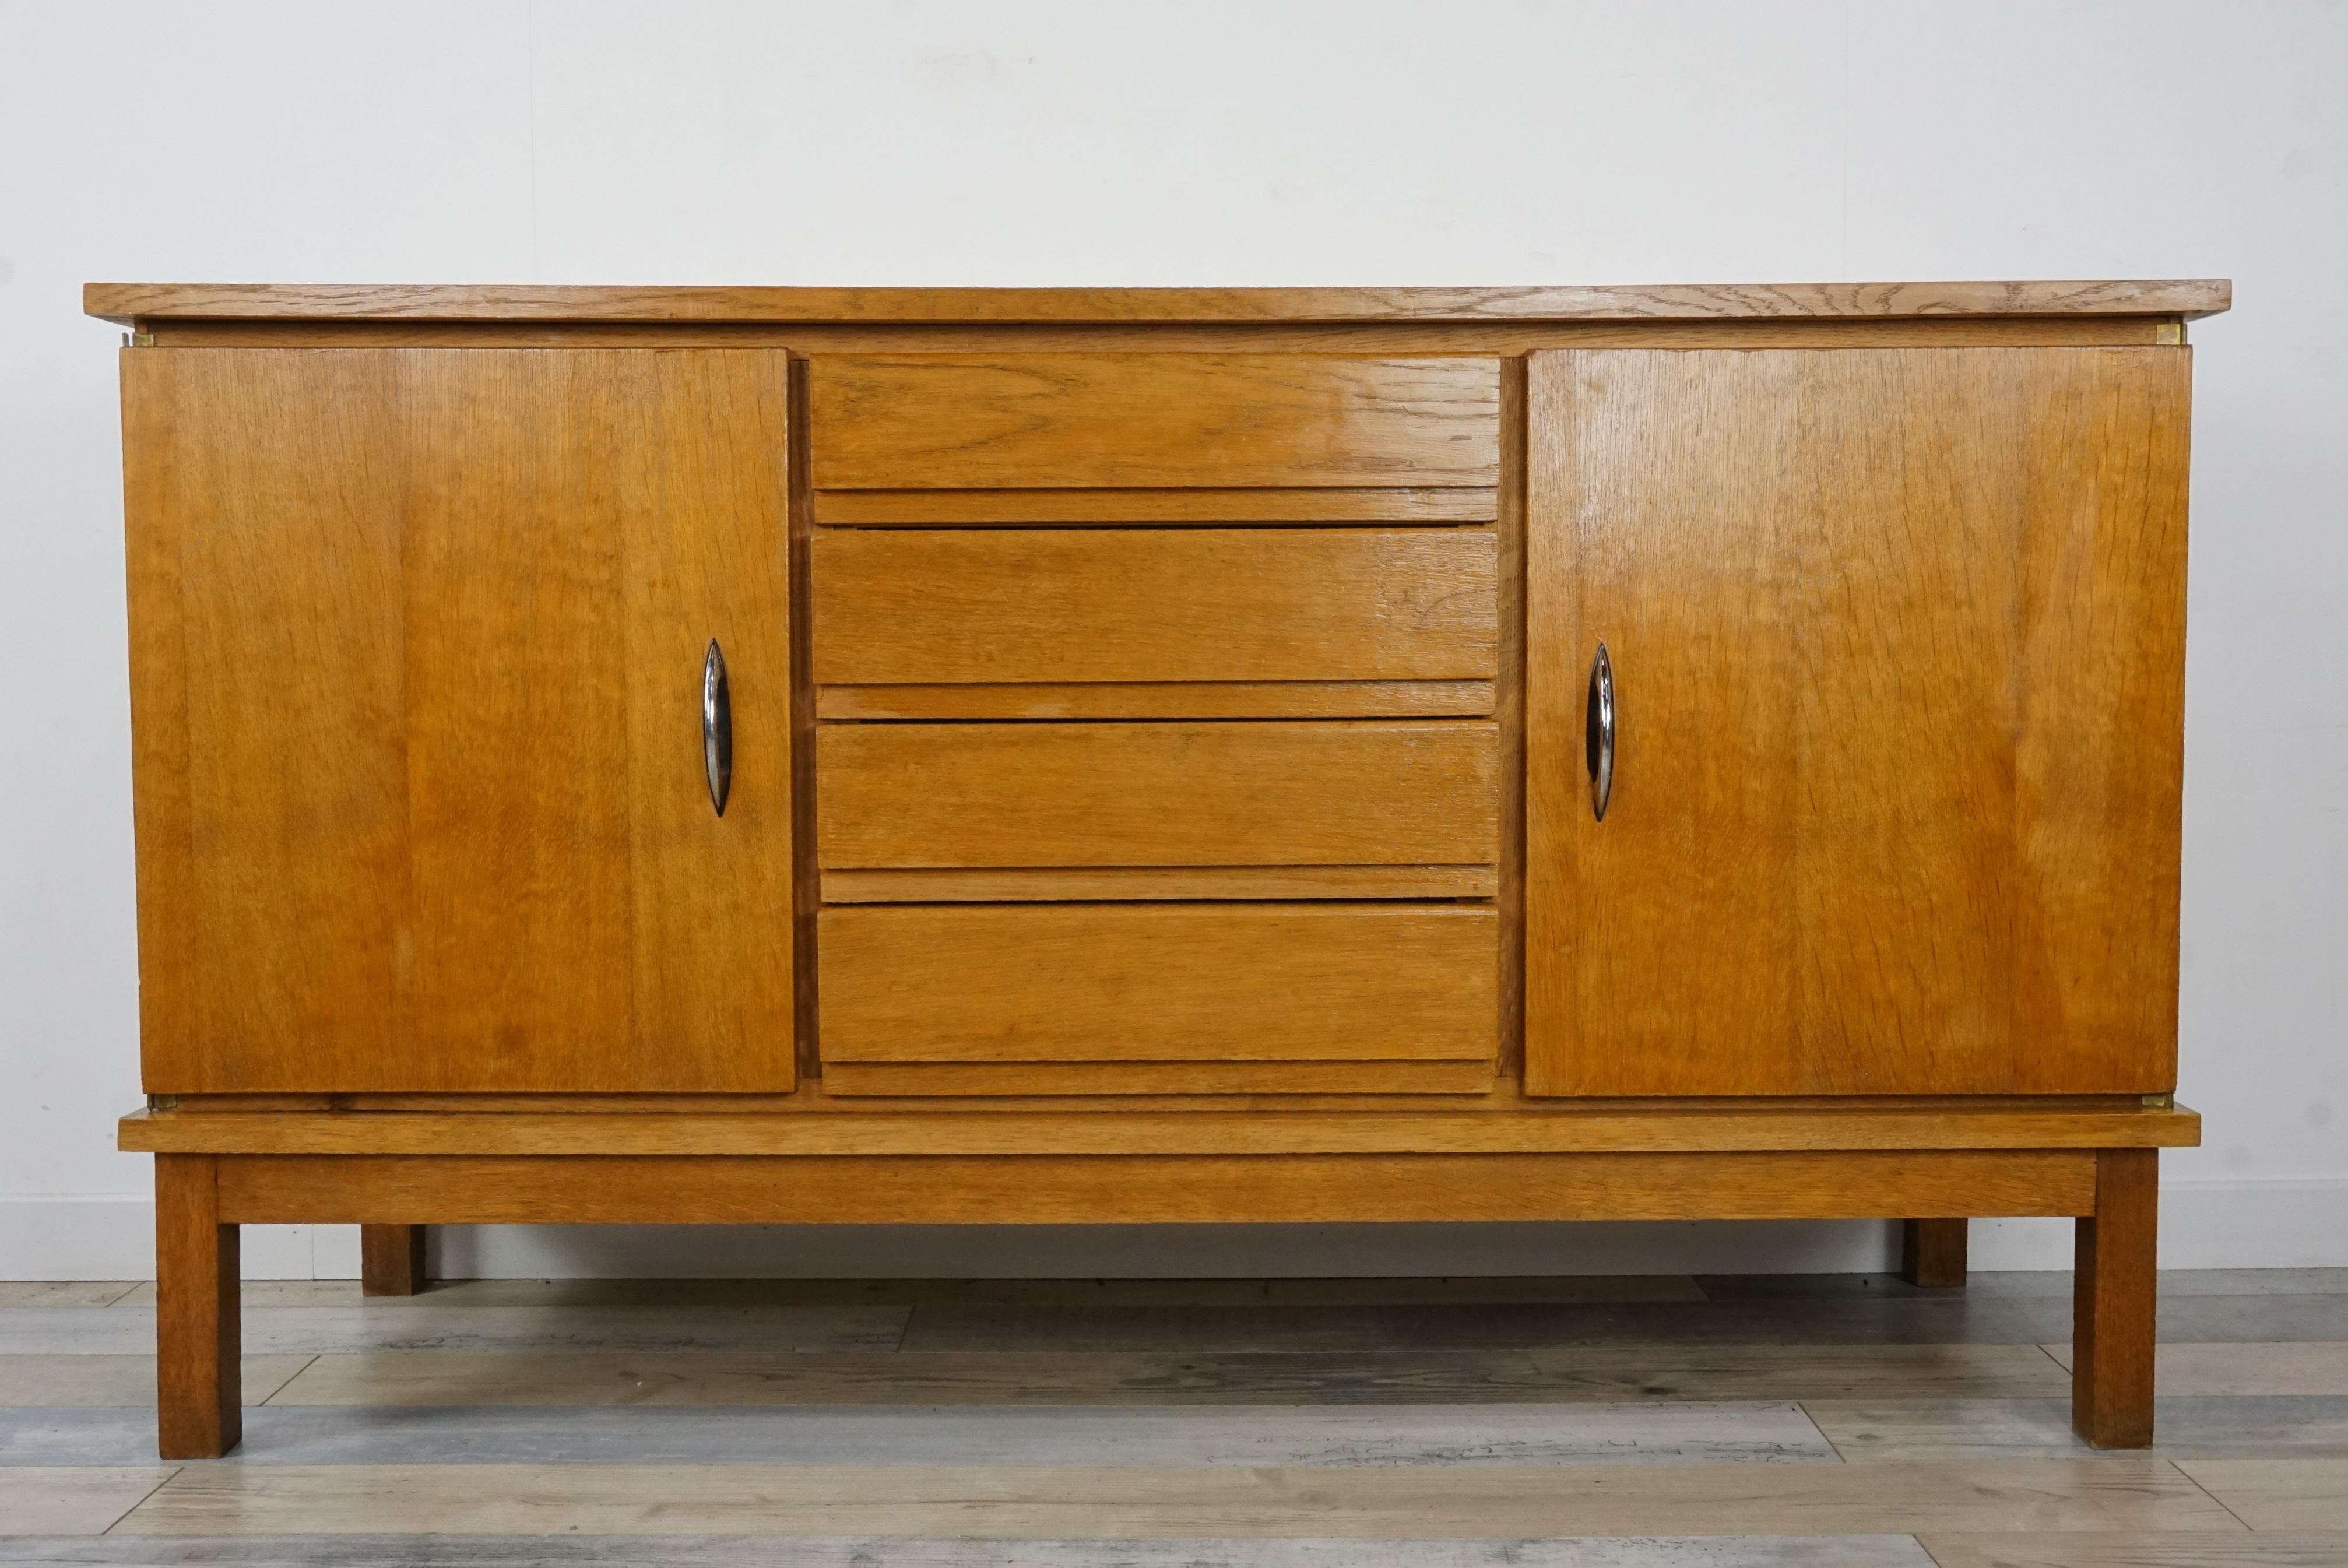 1950s sideboard with sober and Minimalist lines composed of a wooden structure with multiple storage spaces; doors on each side, chrome handles and 4 central drawers, all in perfect condition. Harmony and Organization!